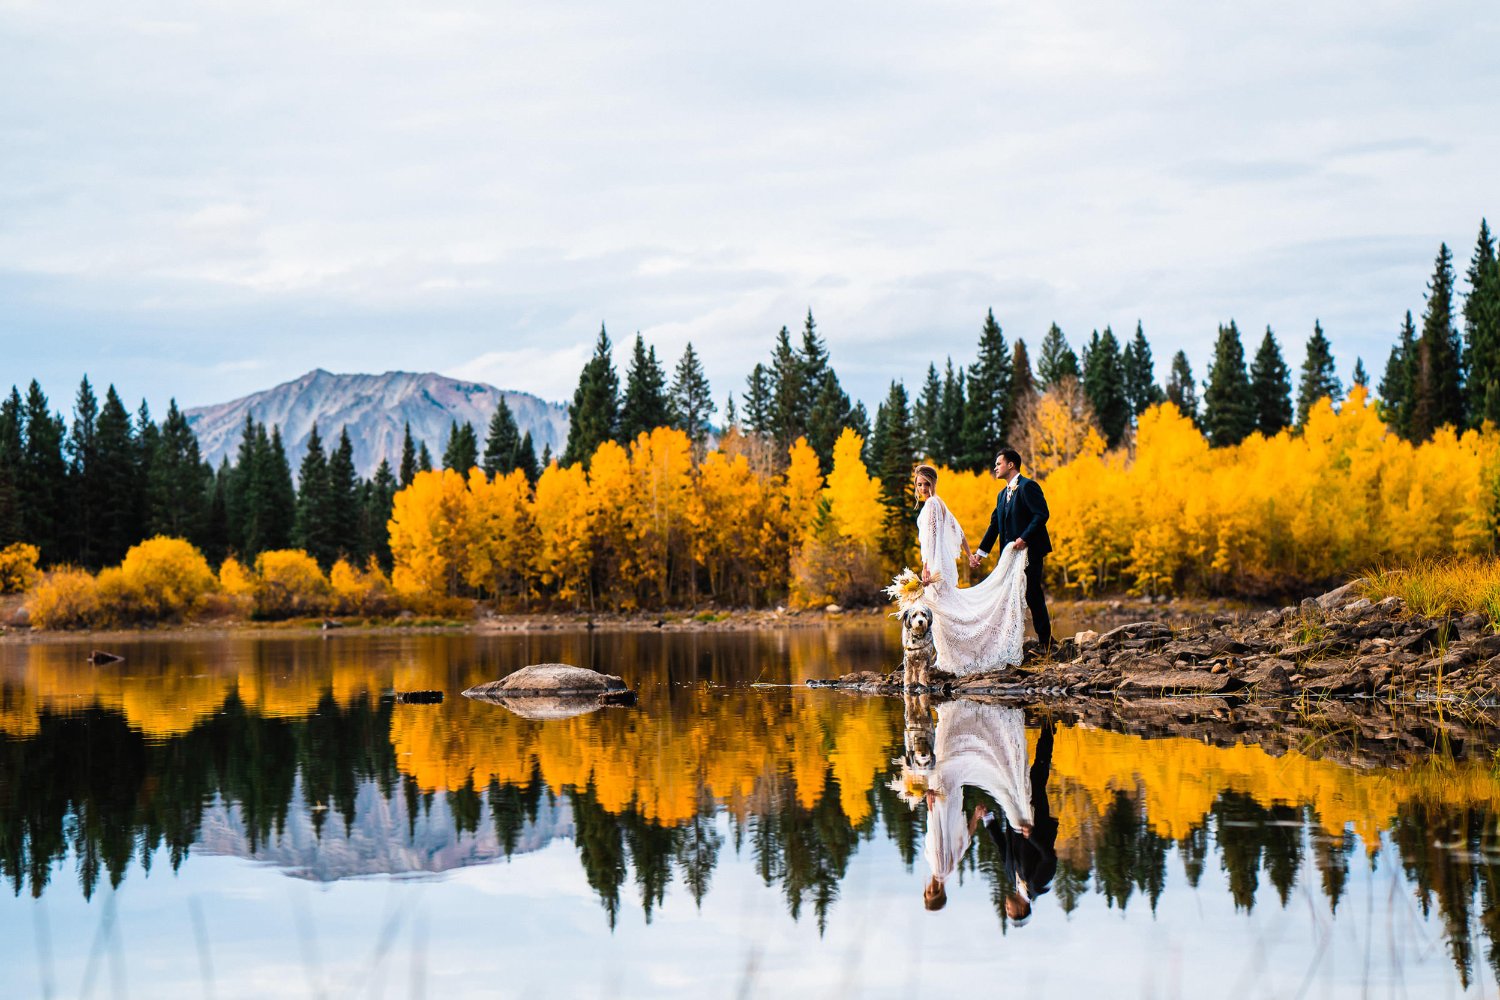 Capturing romantic elopement photos of a beautiful bride and groom amidst the breathtaking autumn backdrop of a serene lake.